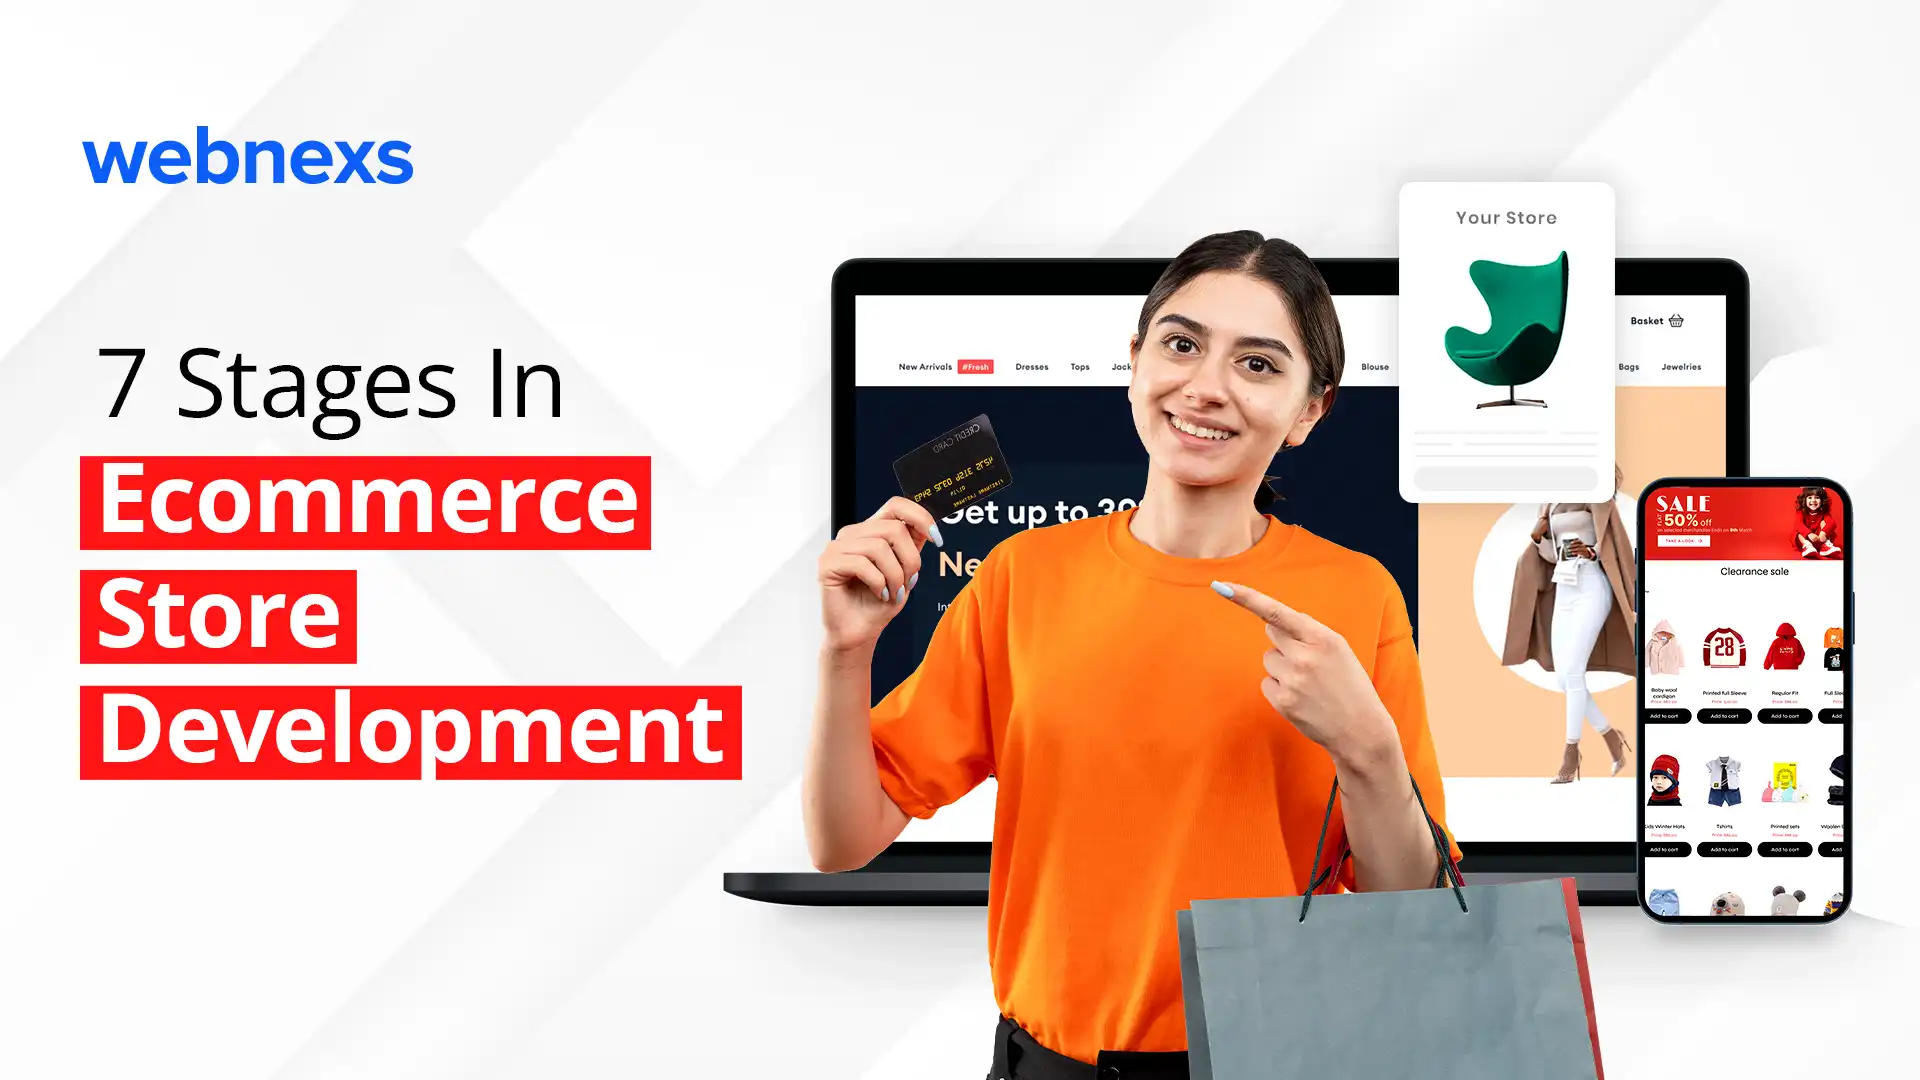 7 Stages In Ecommerce Store Development